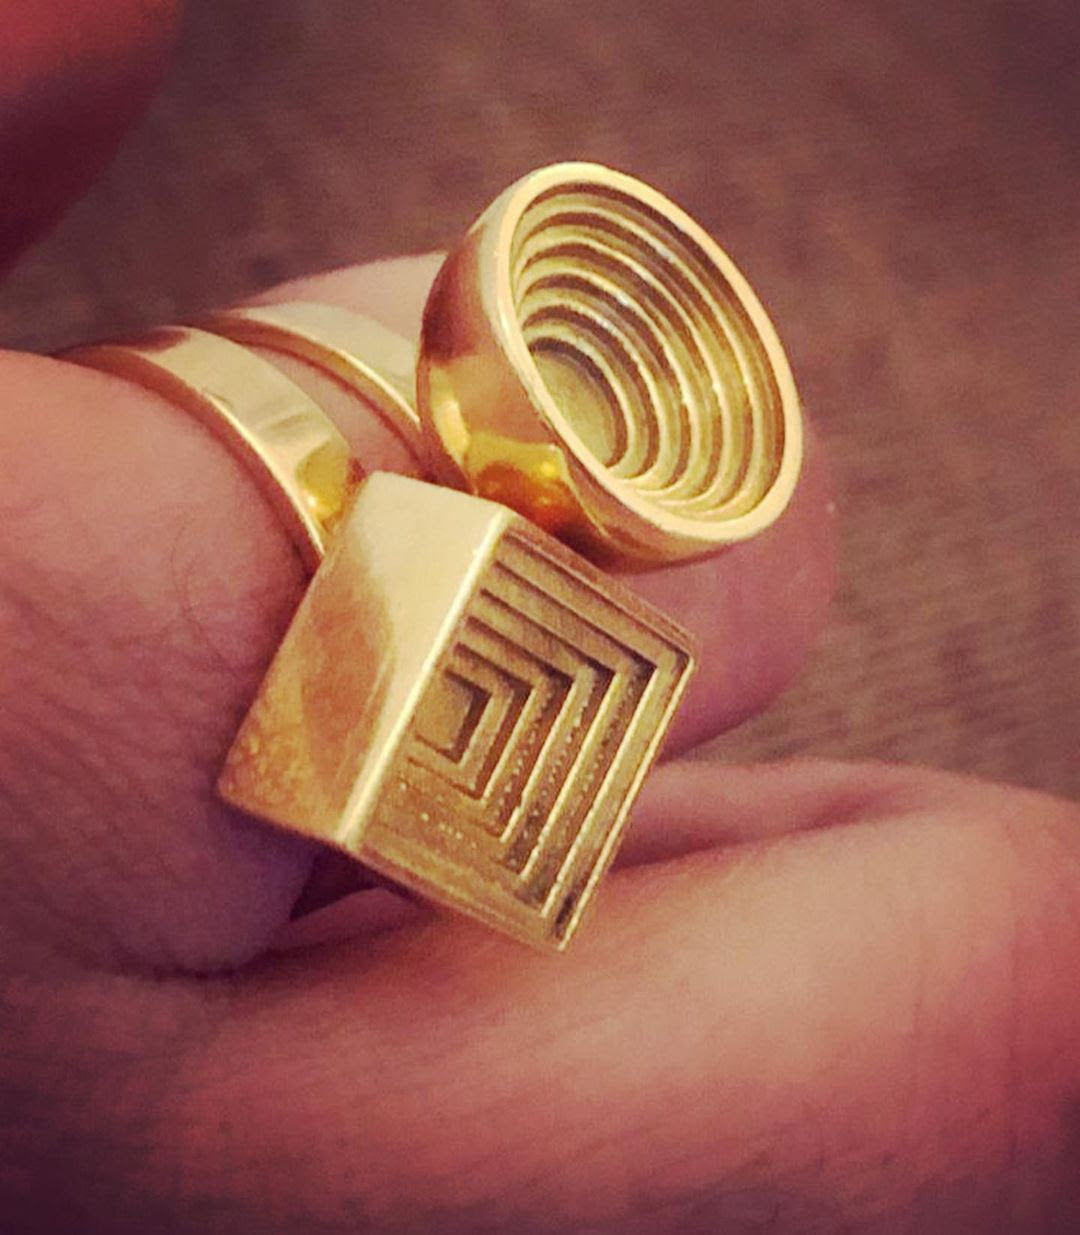 24:7 Square embossed Geometric Spinner Ring in 18 Karat Yellow Gold by Solange Azagury-Partridge on hand